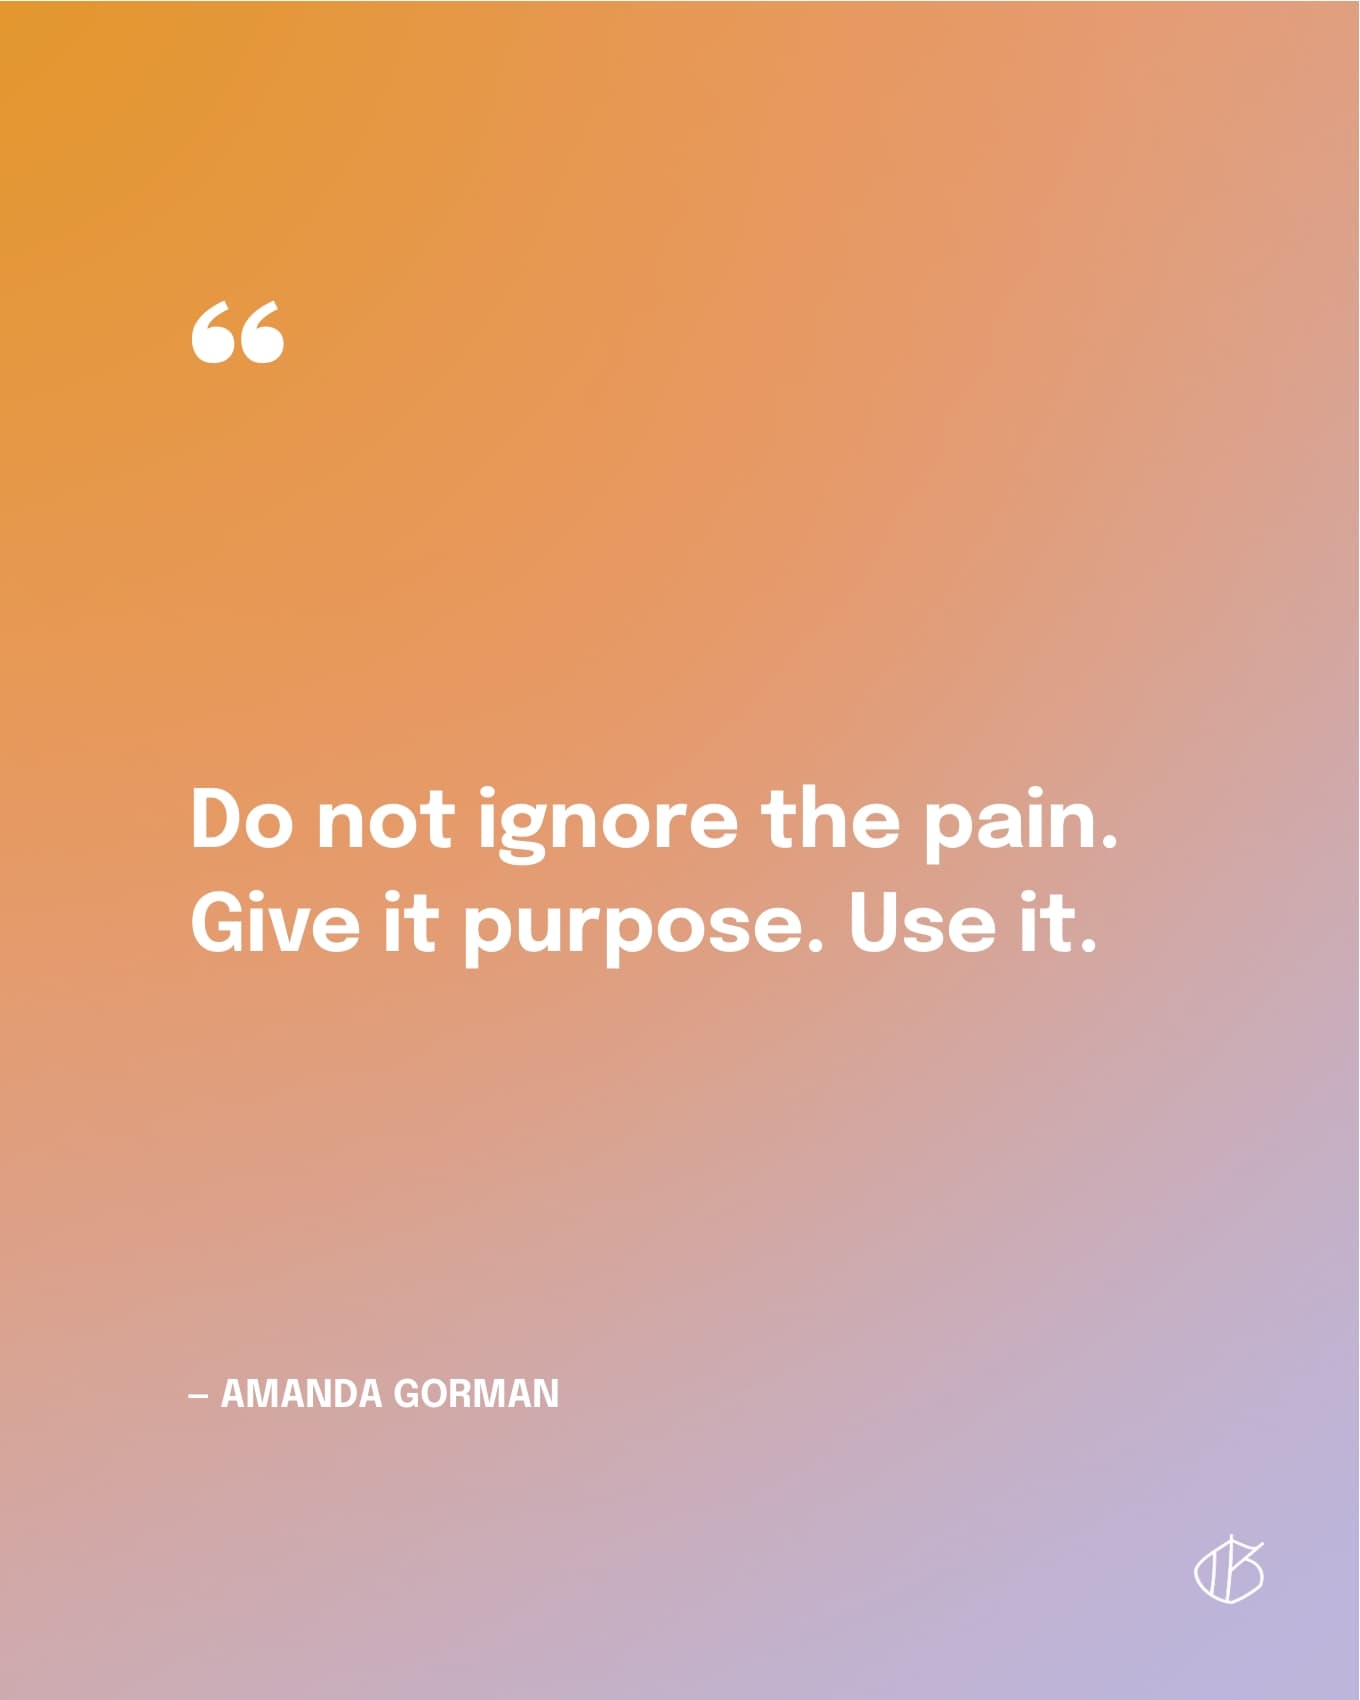 Do not ignore the pain. Give it purpose. Use it. — Amanda Gorman poem quote